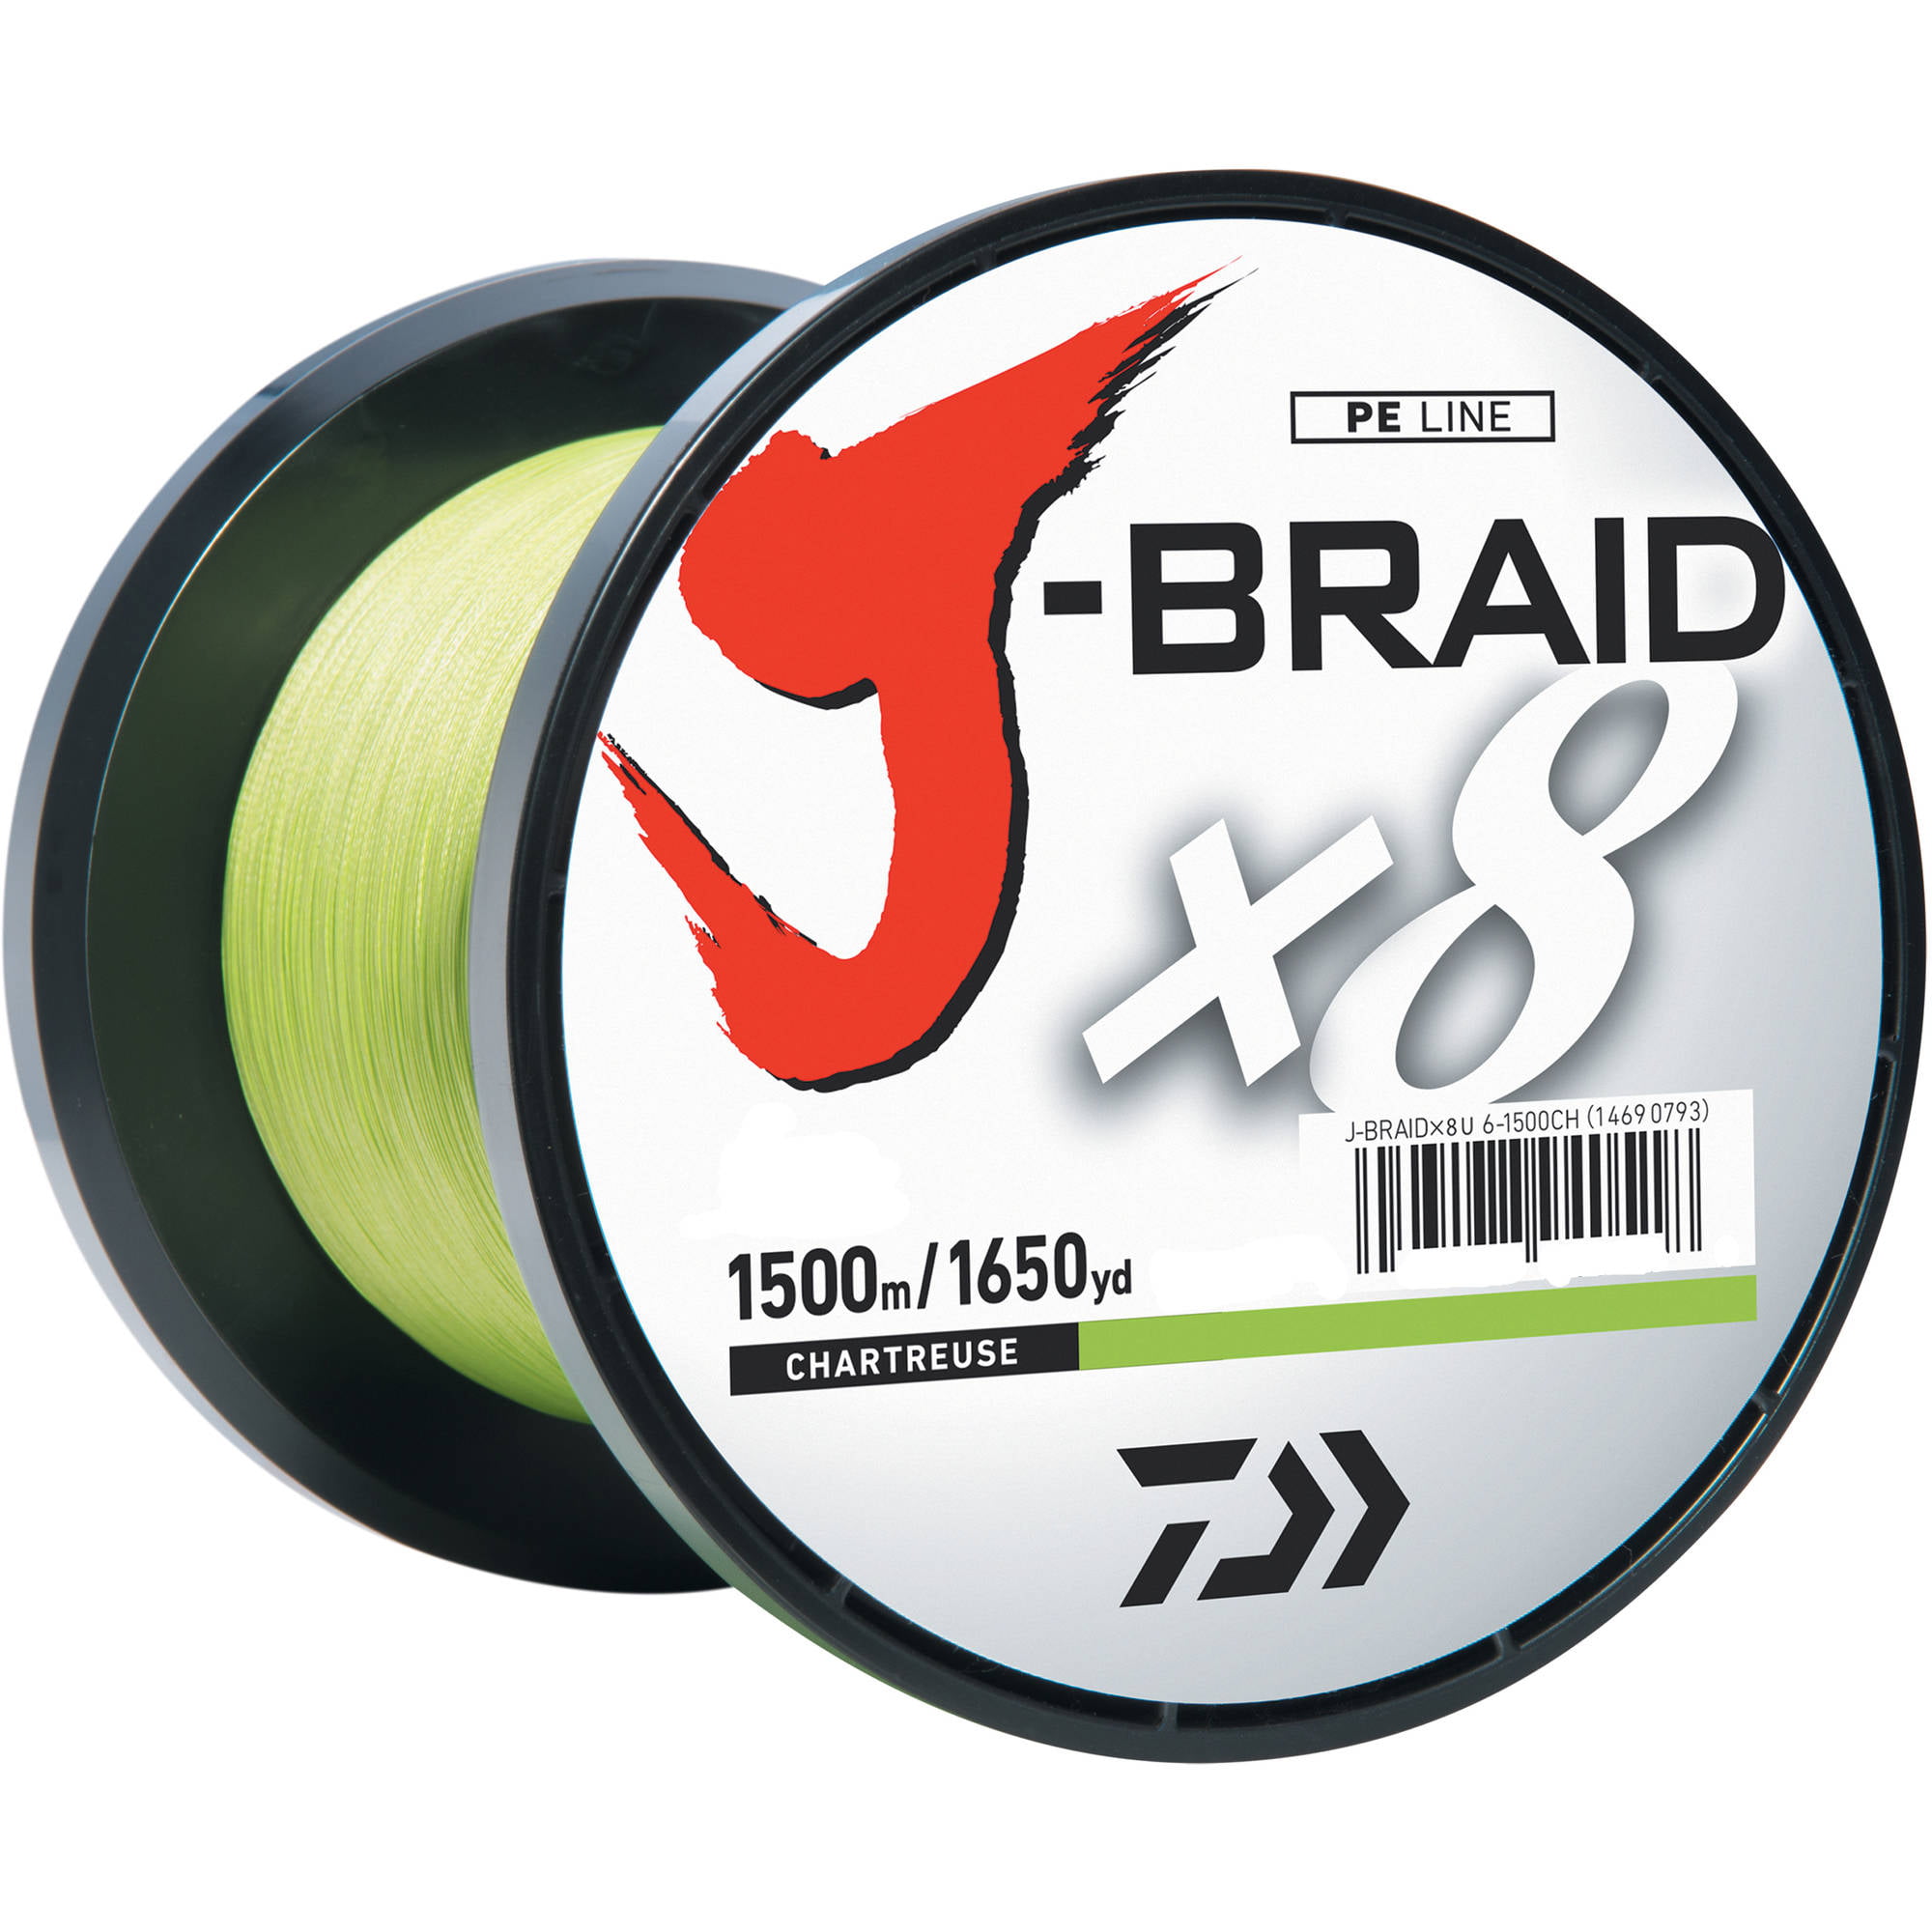 Details about   High-quality BRAIDED fishing line perfect for freshwater or saltwater fishing 